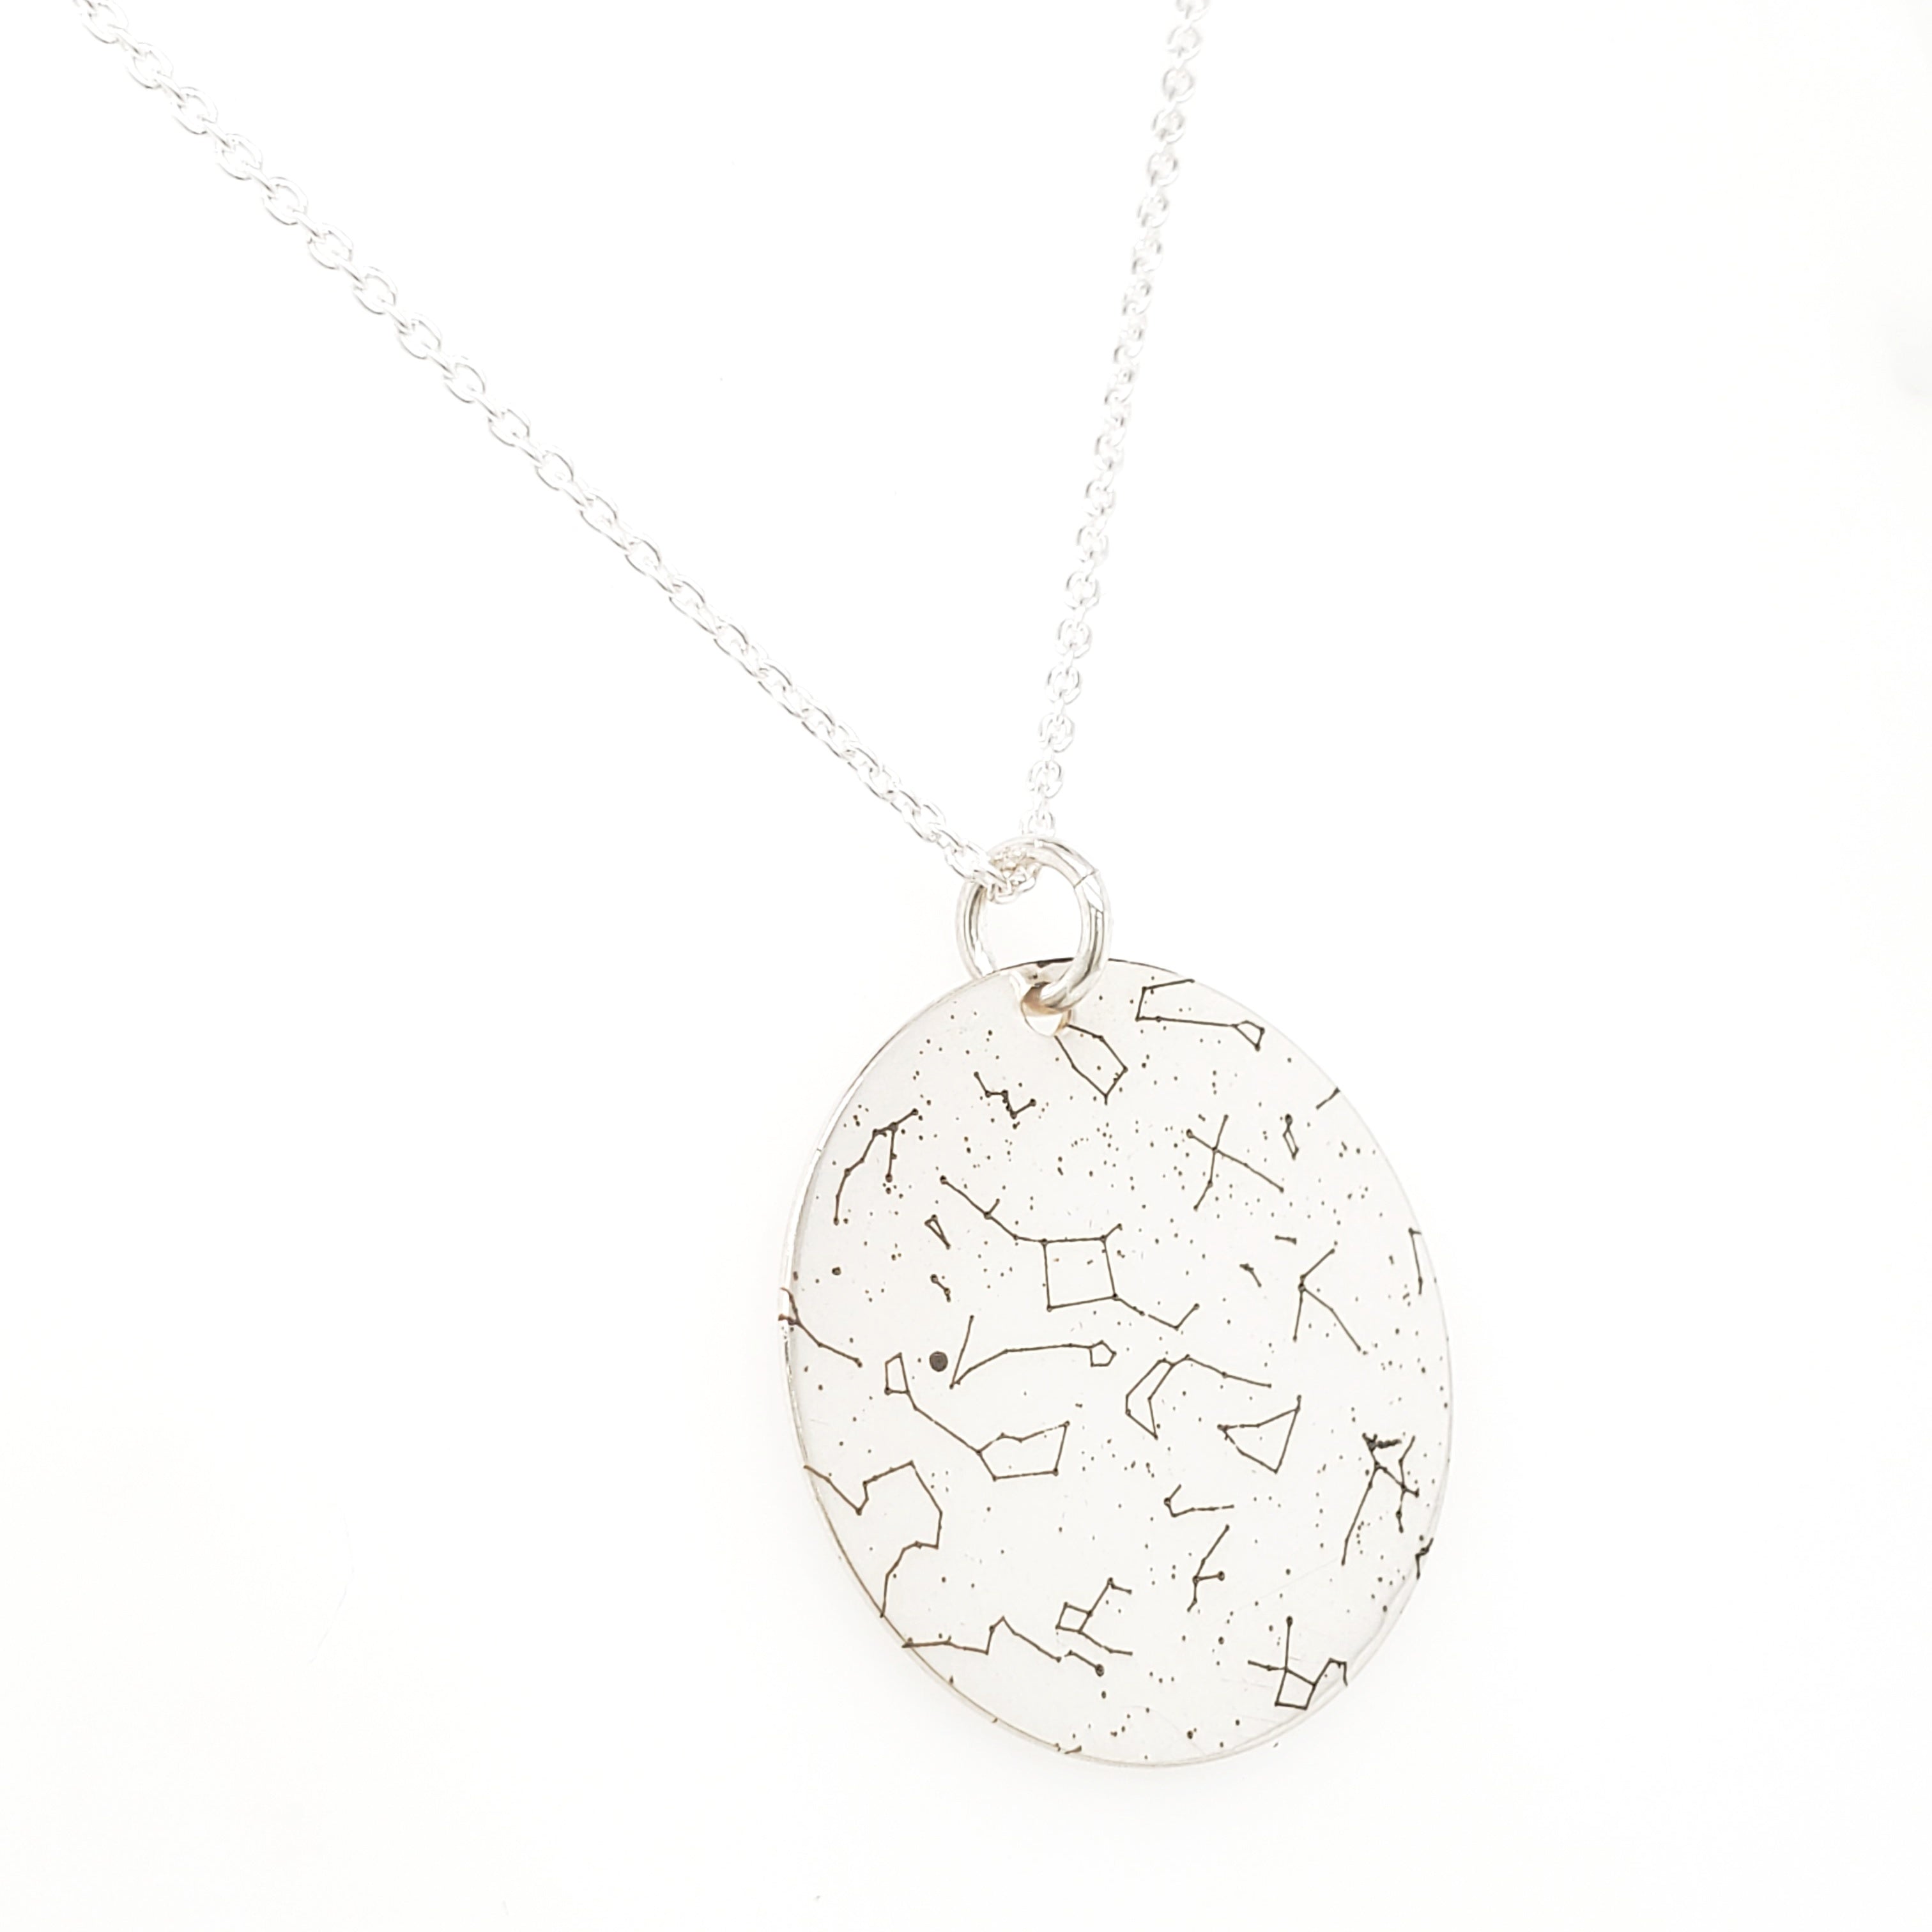 Custom Star Map Necklace in Sterling Silver by Lat & Lo. Disc Necklace.